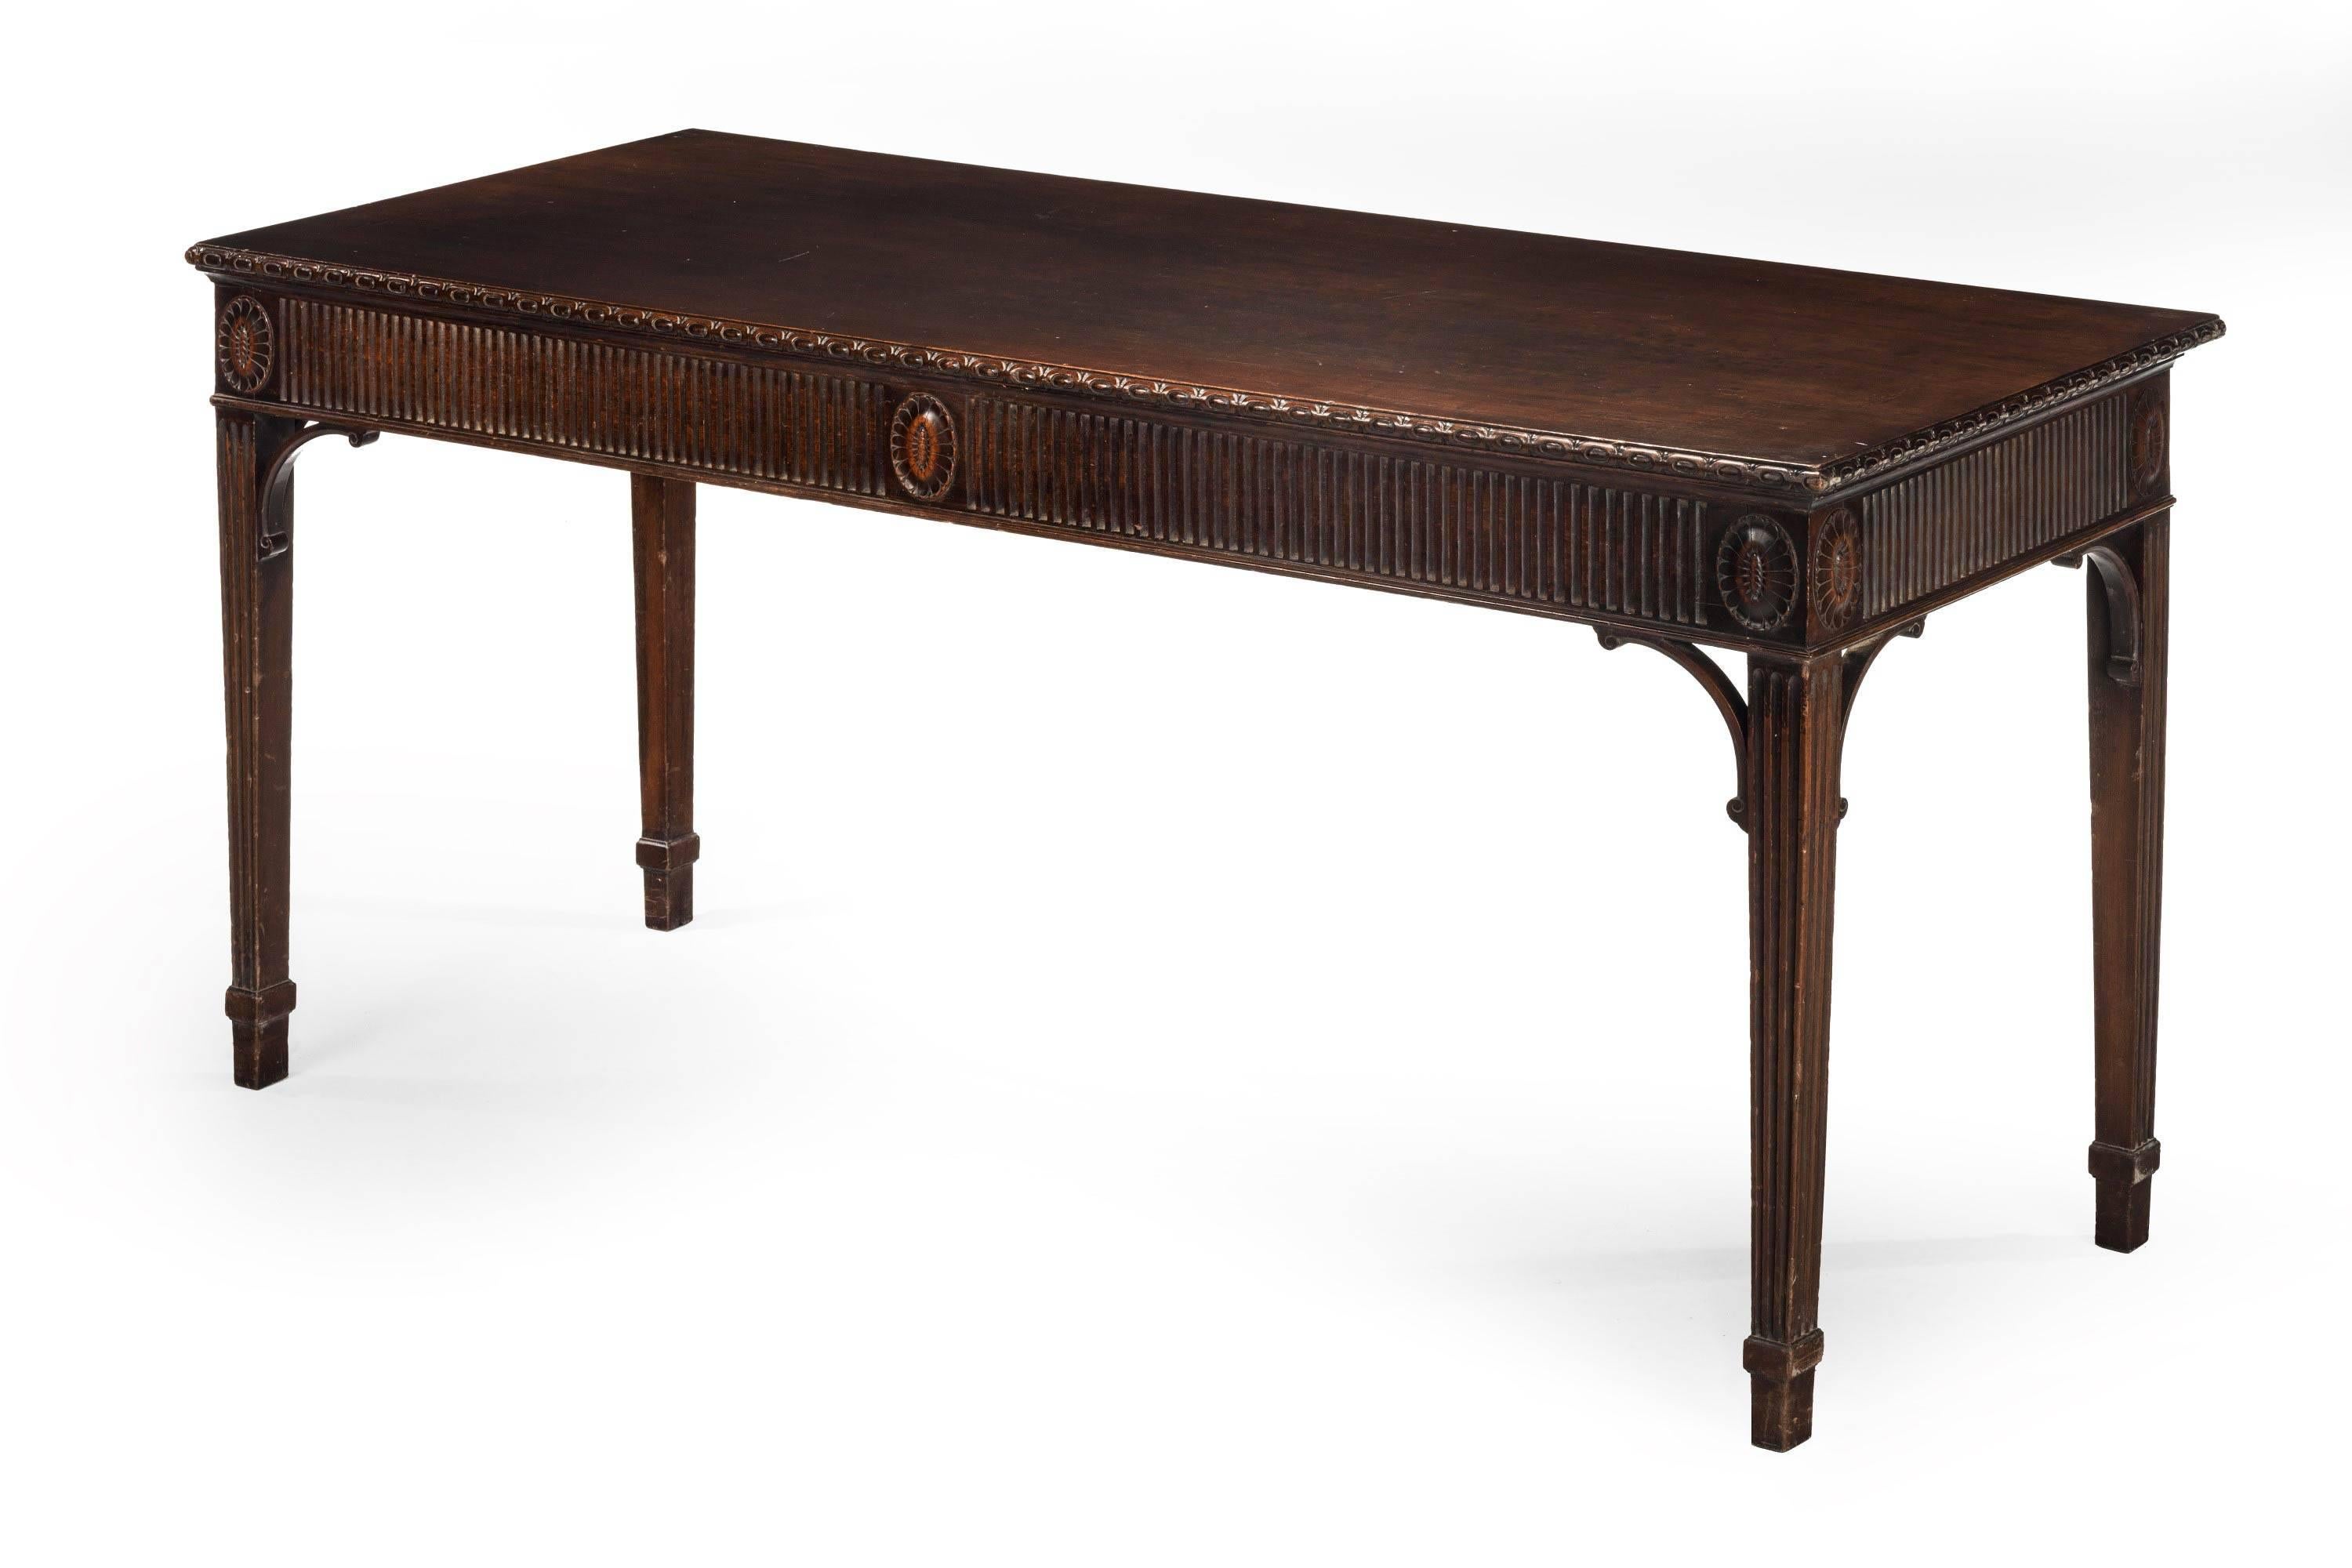 A very fine original George III mahogany serving table. With a very well carved, indented frieze and oval patera to the main part of the frieze. Quite exceptional original condition.